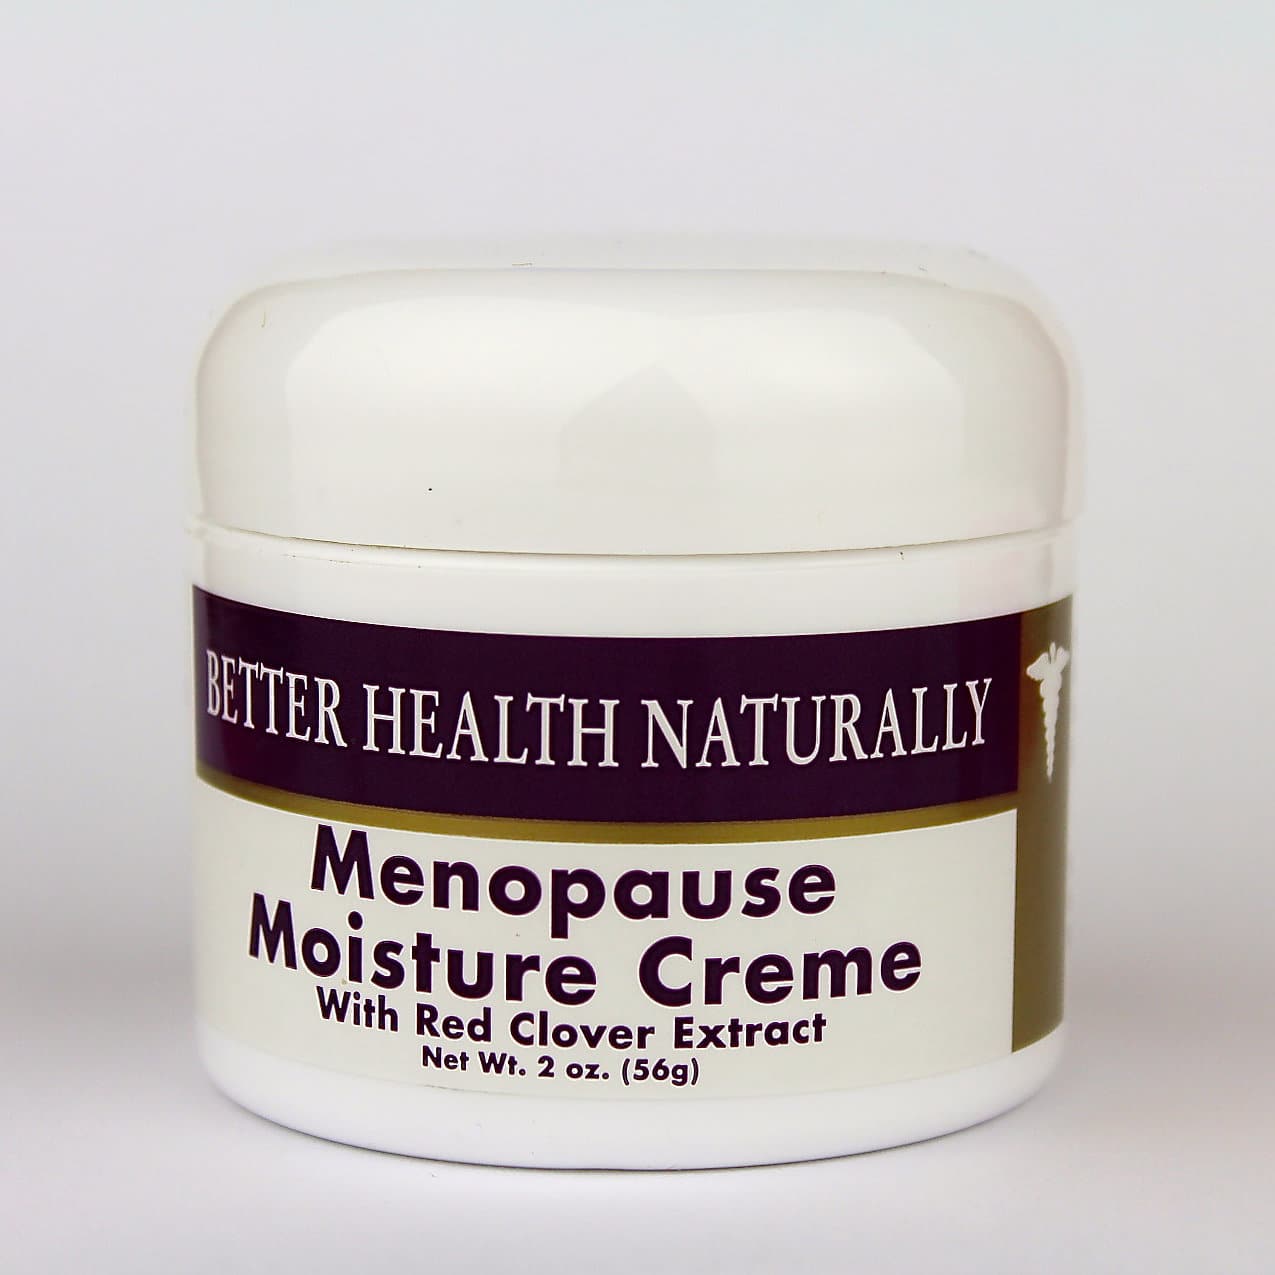 Menopause Moisture Crème with Red Clover Extract (2 oz.)